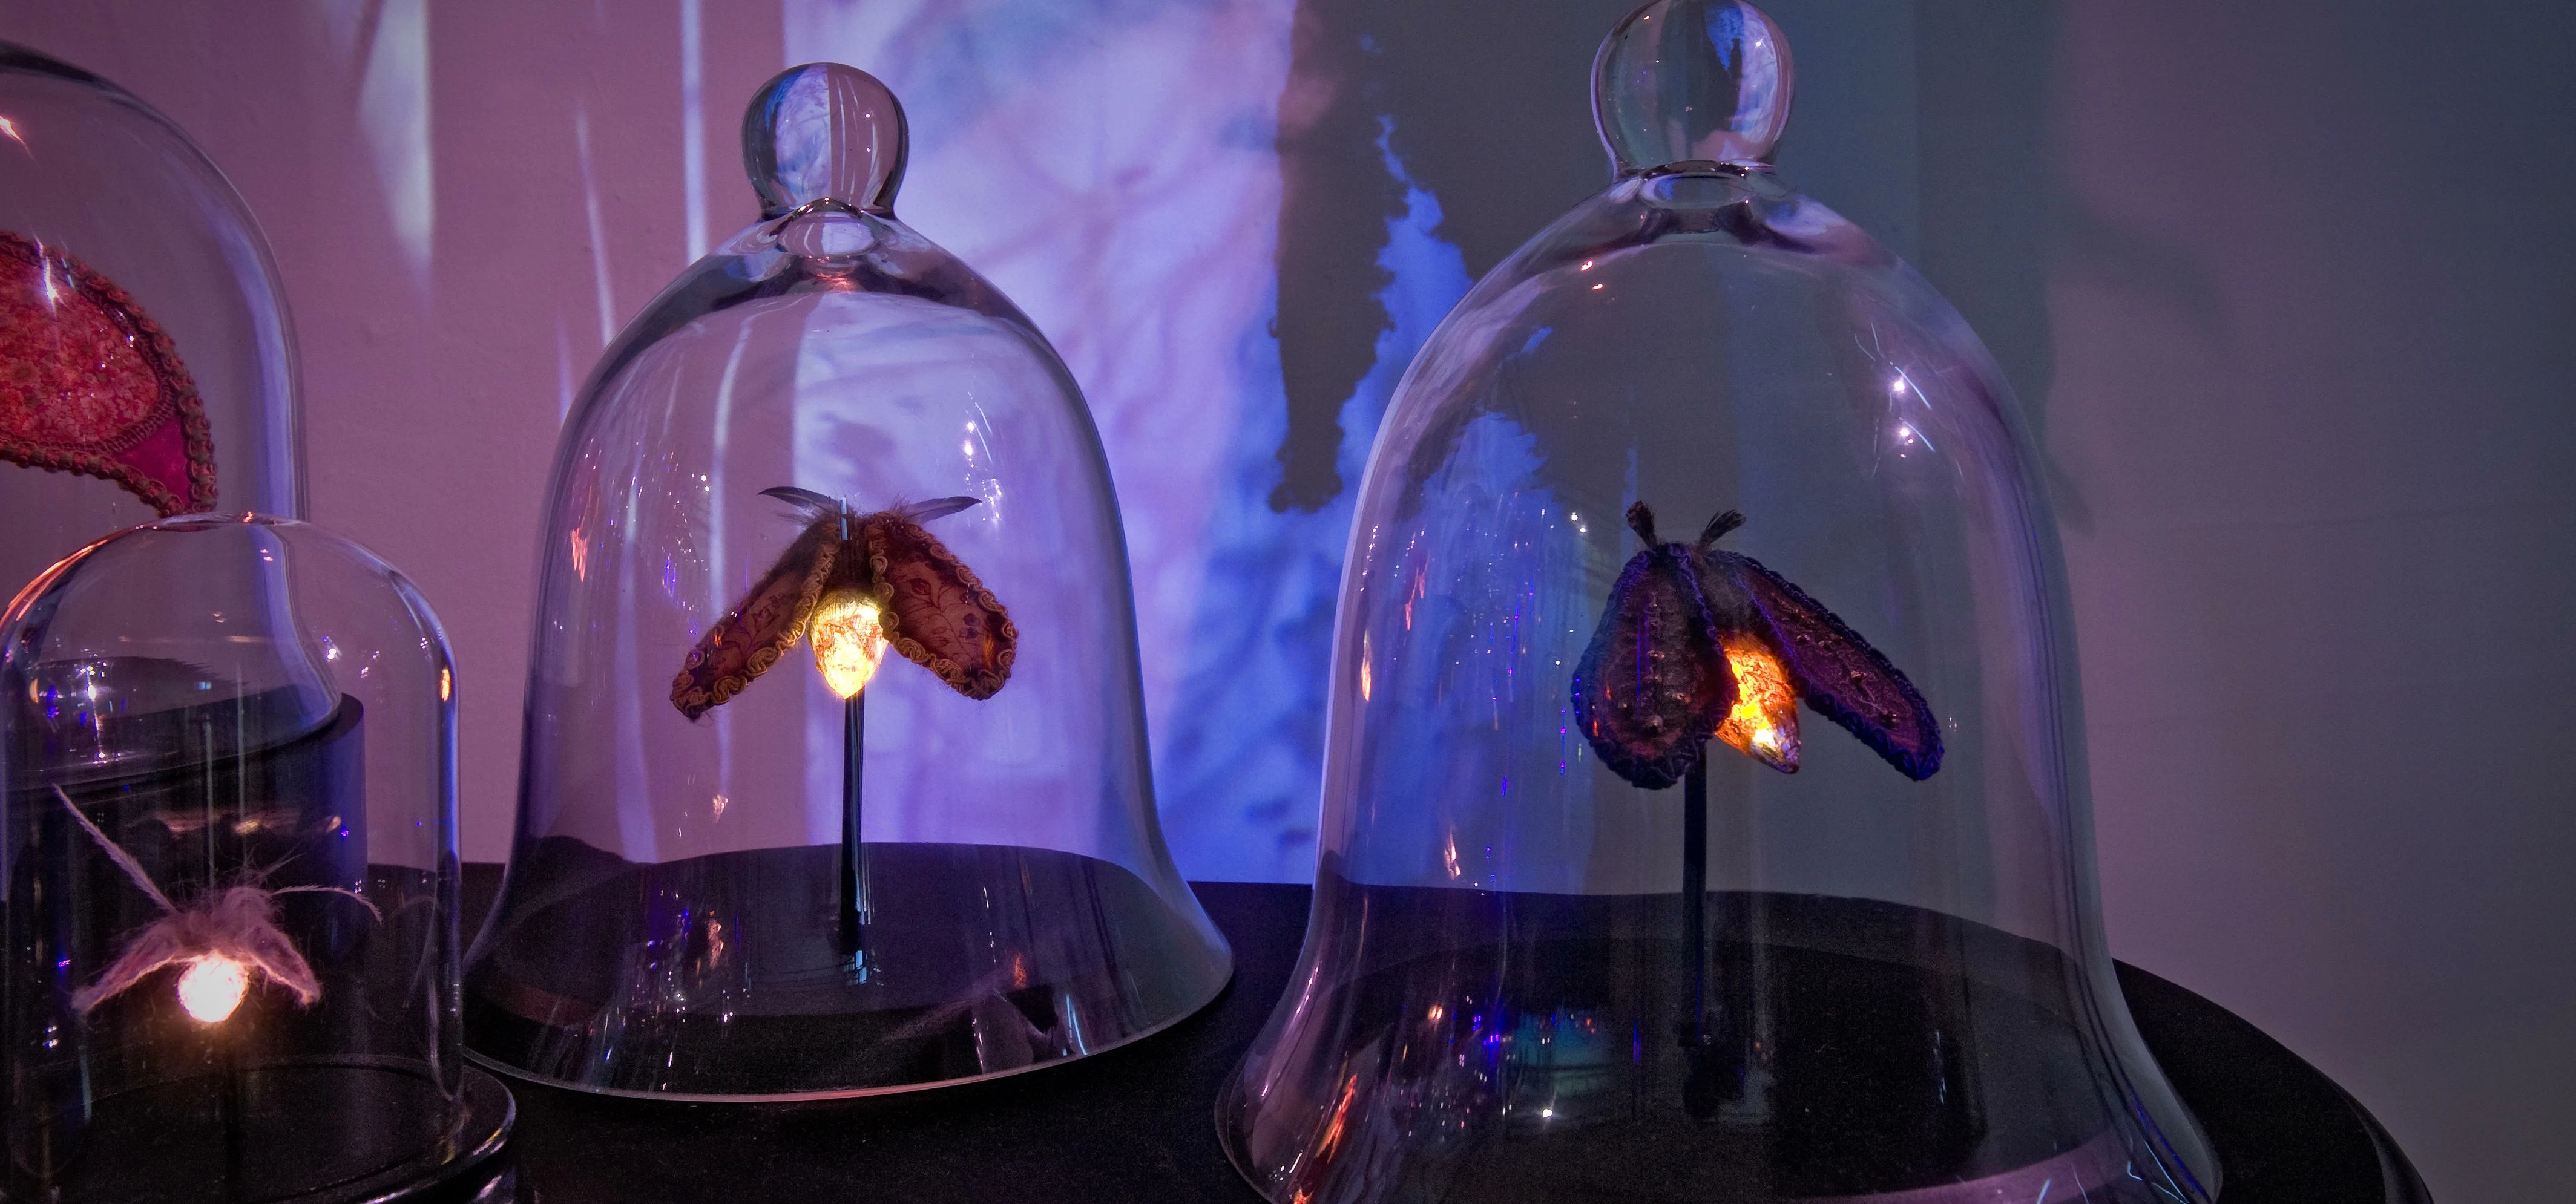 Stunning installation will portray a magical world of illuminated nocturnal insects. 